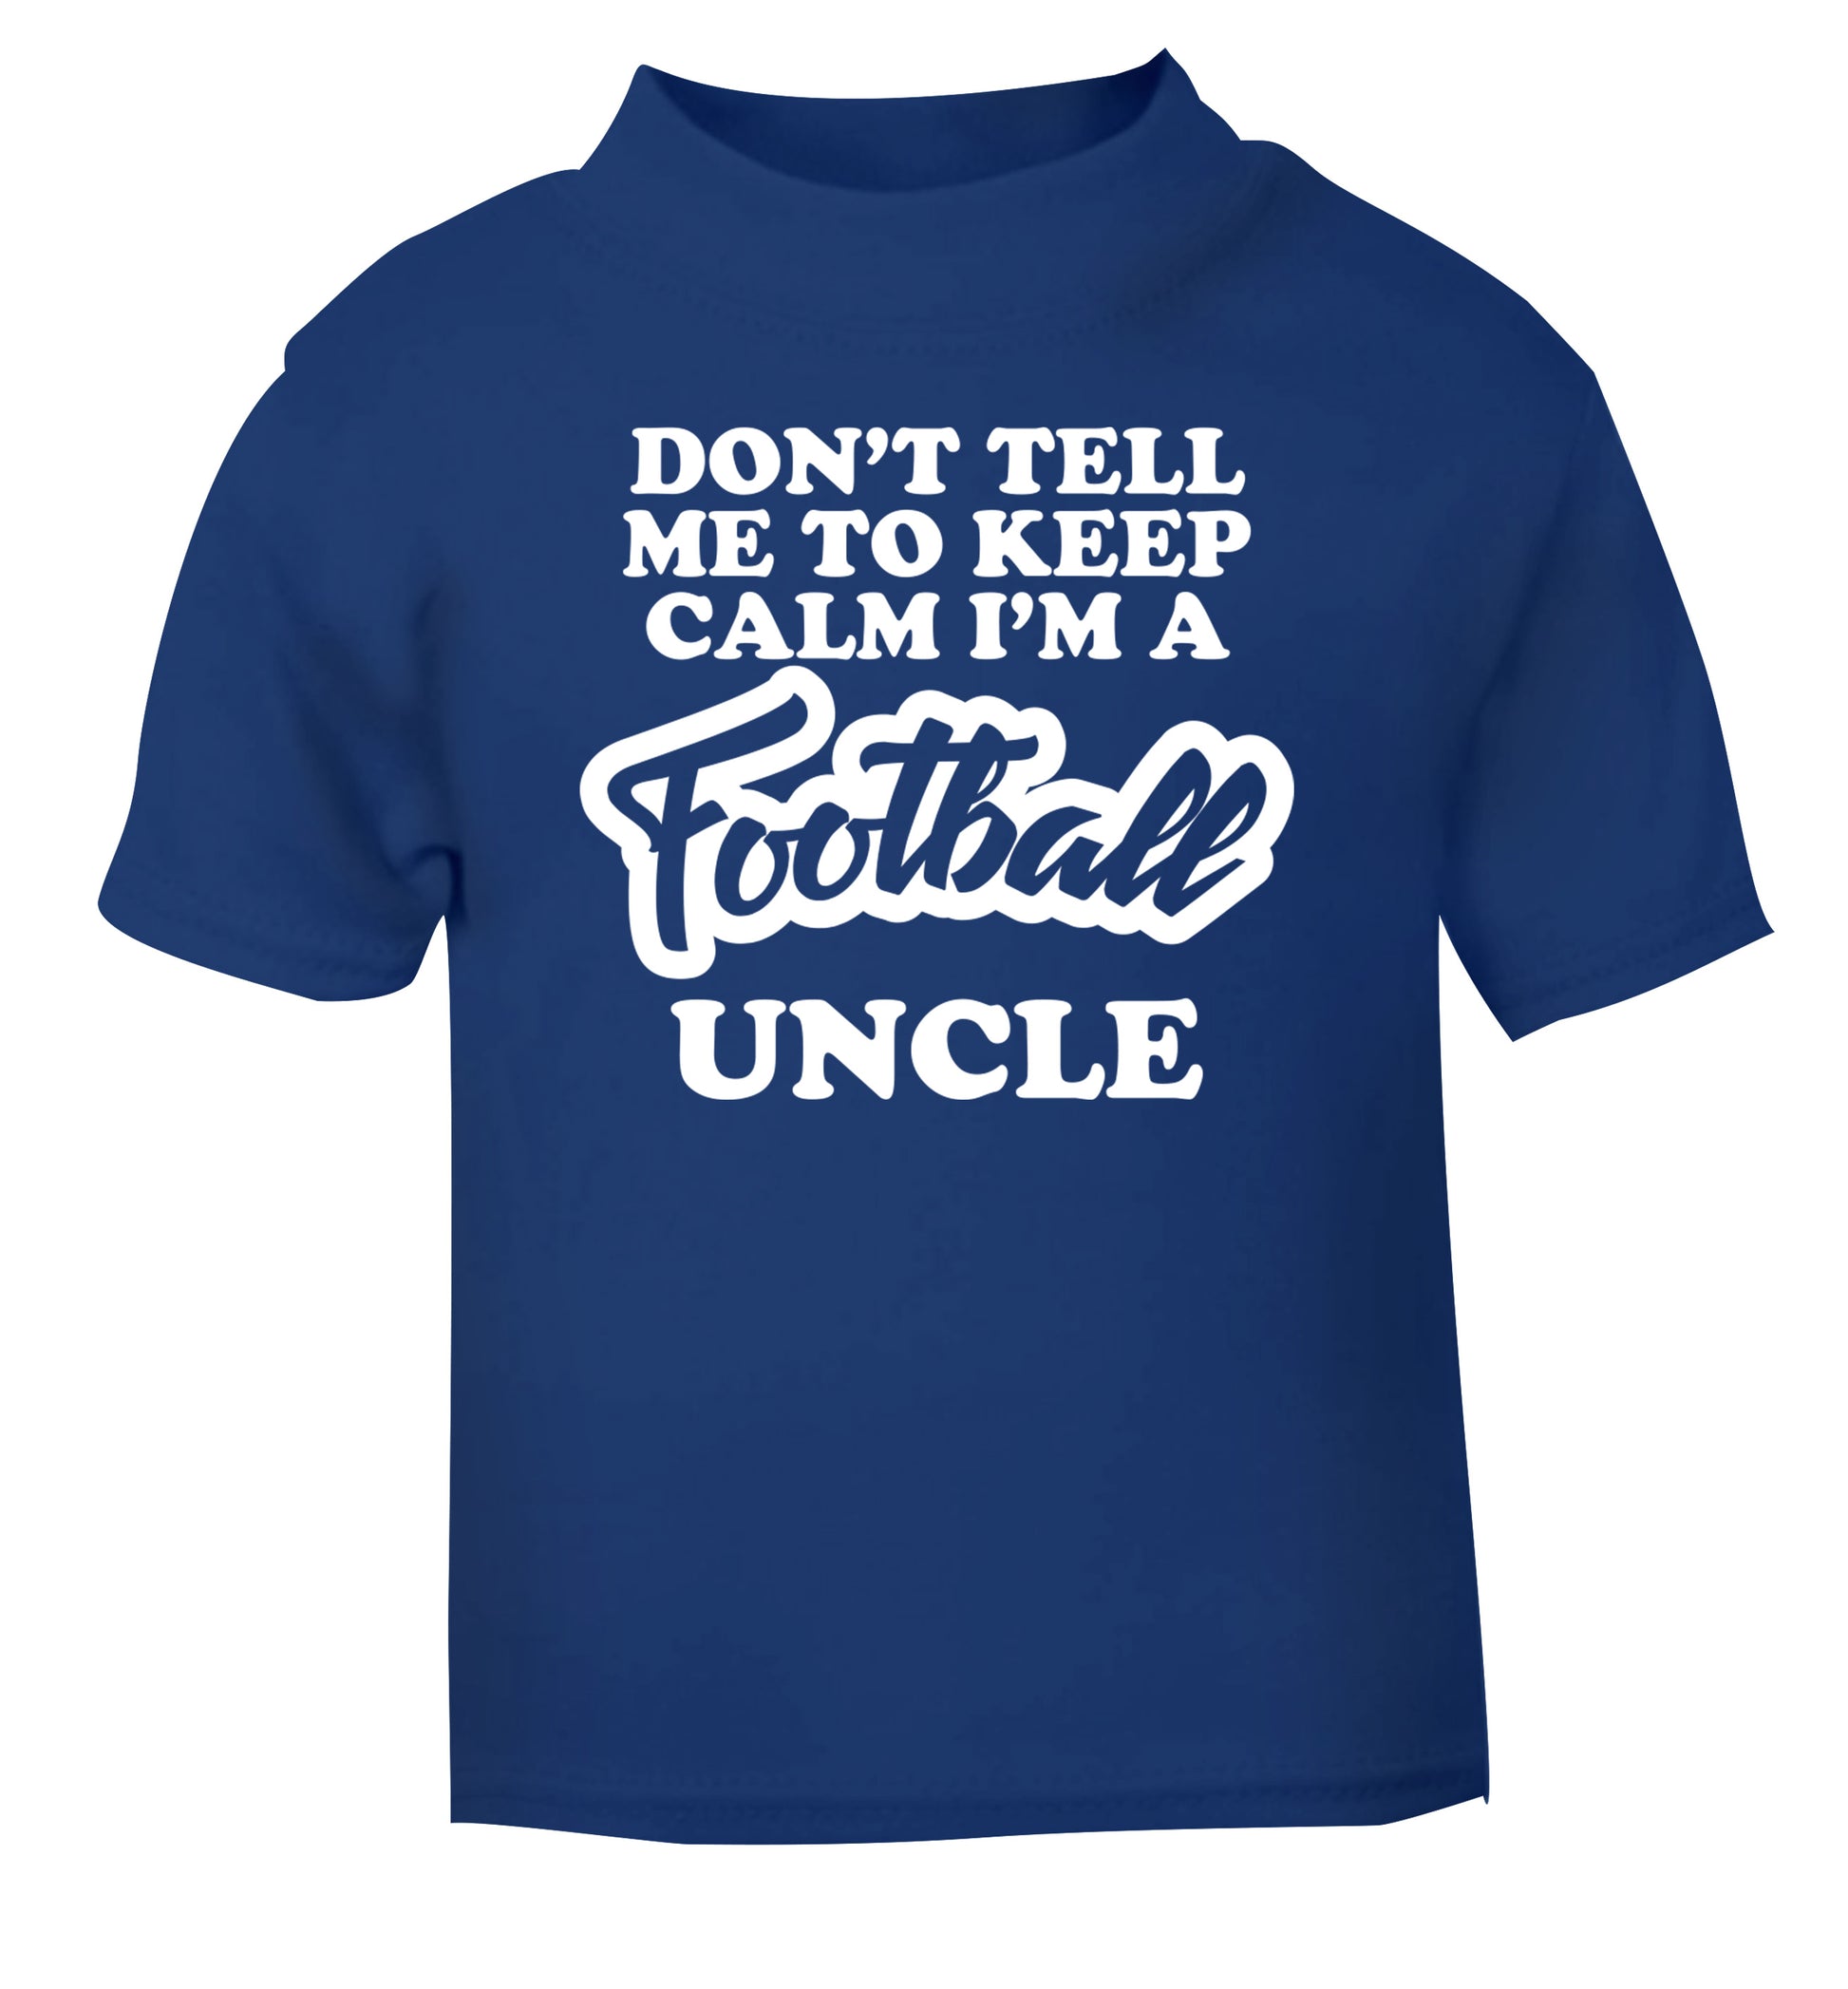 Don't tell me to keep calm I'm a football uncle blue Baby Toddler Tshirt 2 Years